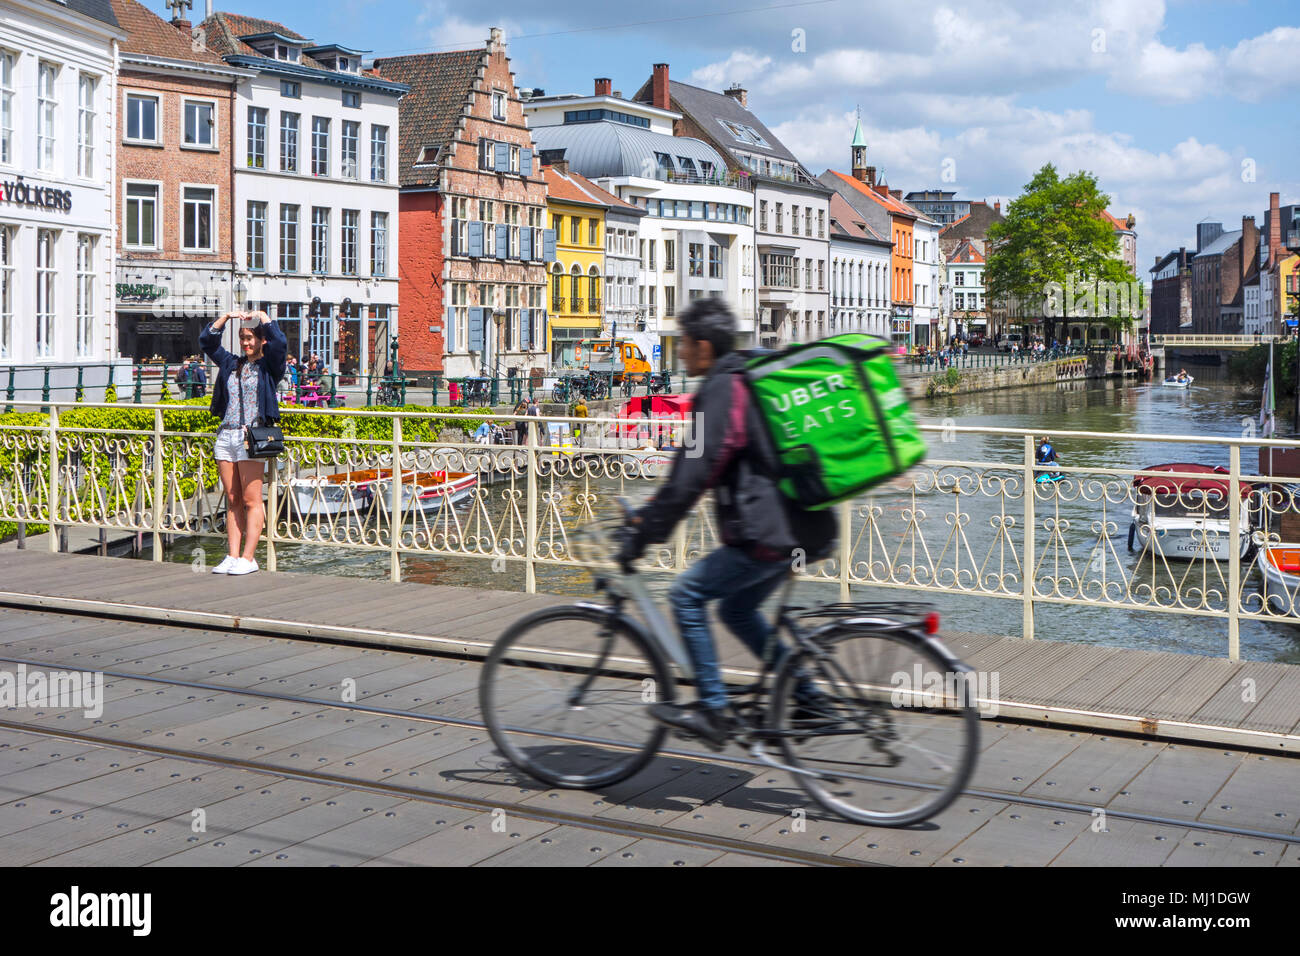 UberEATS / Uber Eats online meal ordering and delivery platform, bicycle courier delivering meals in the city center of Ghent, Belgium Stock Photo